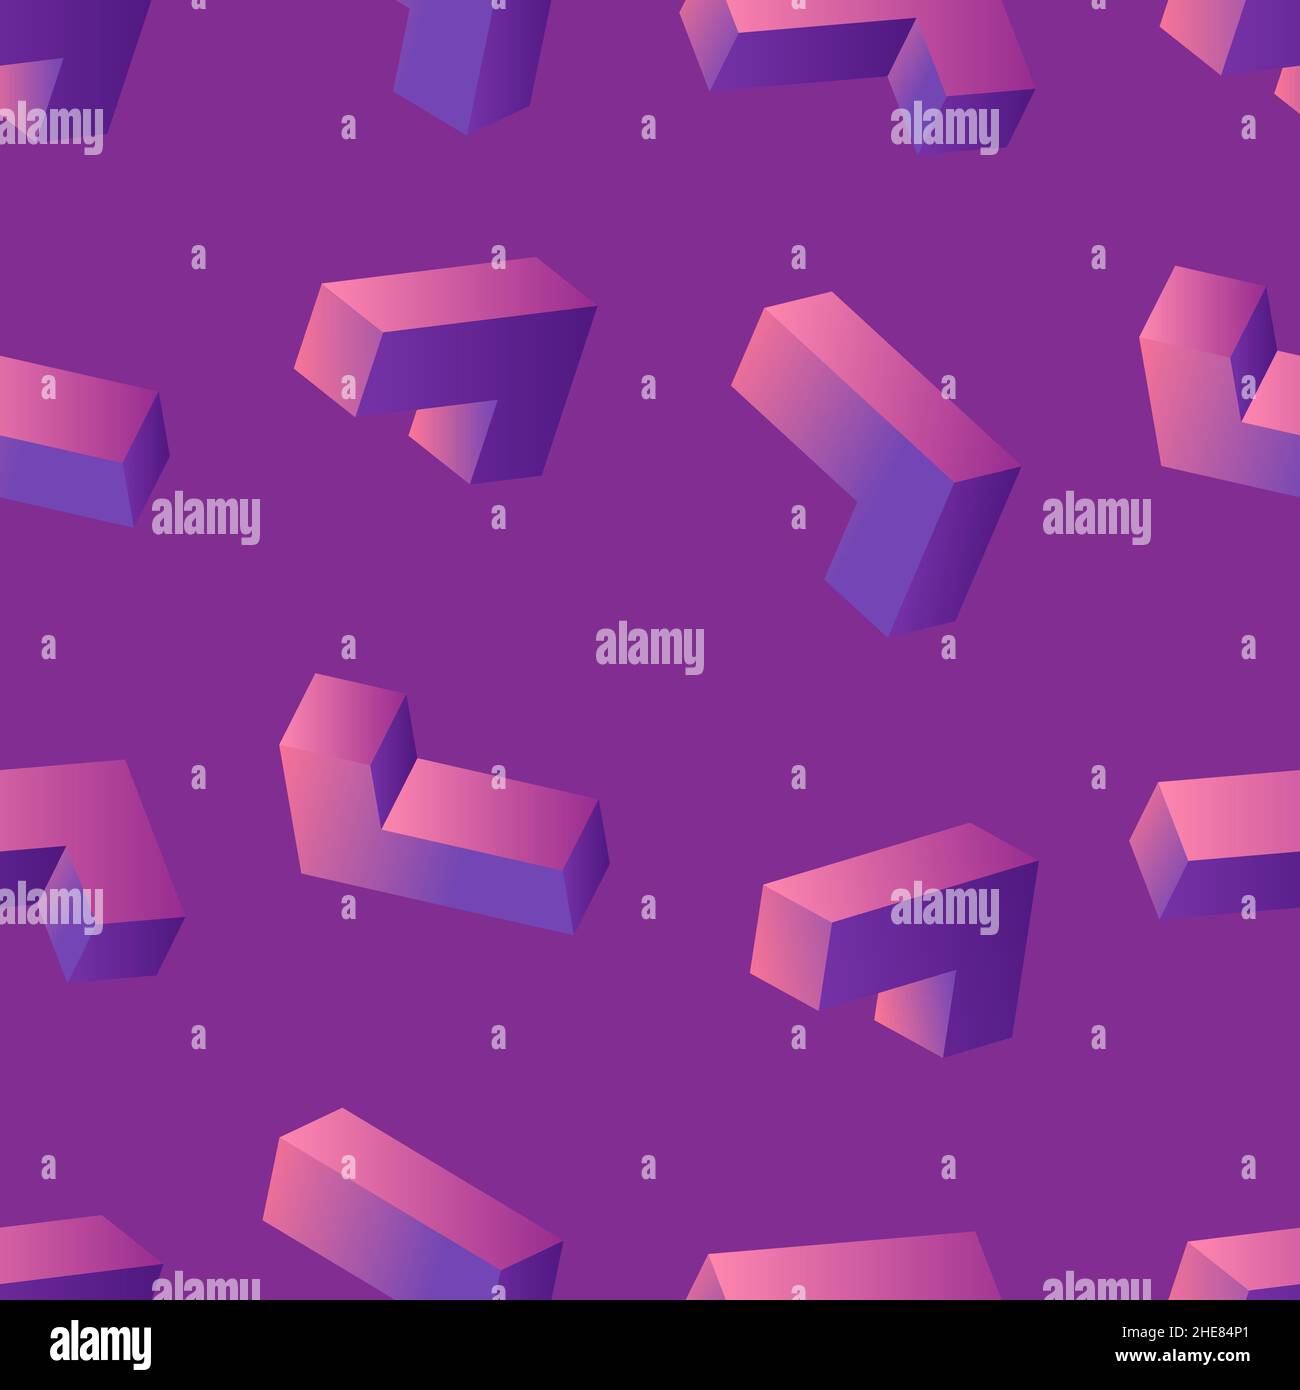 Neon glowing 3d tetris blocks seamless pattern on purple background. Vintage 80s style design. Clipping mask used. Stock Vector